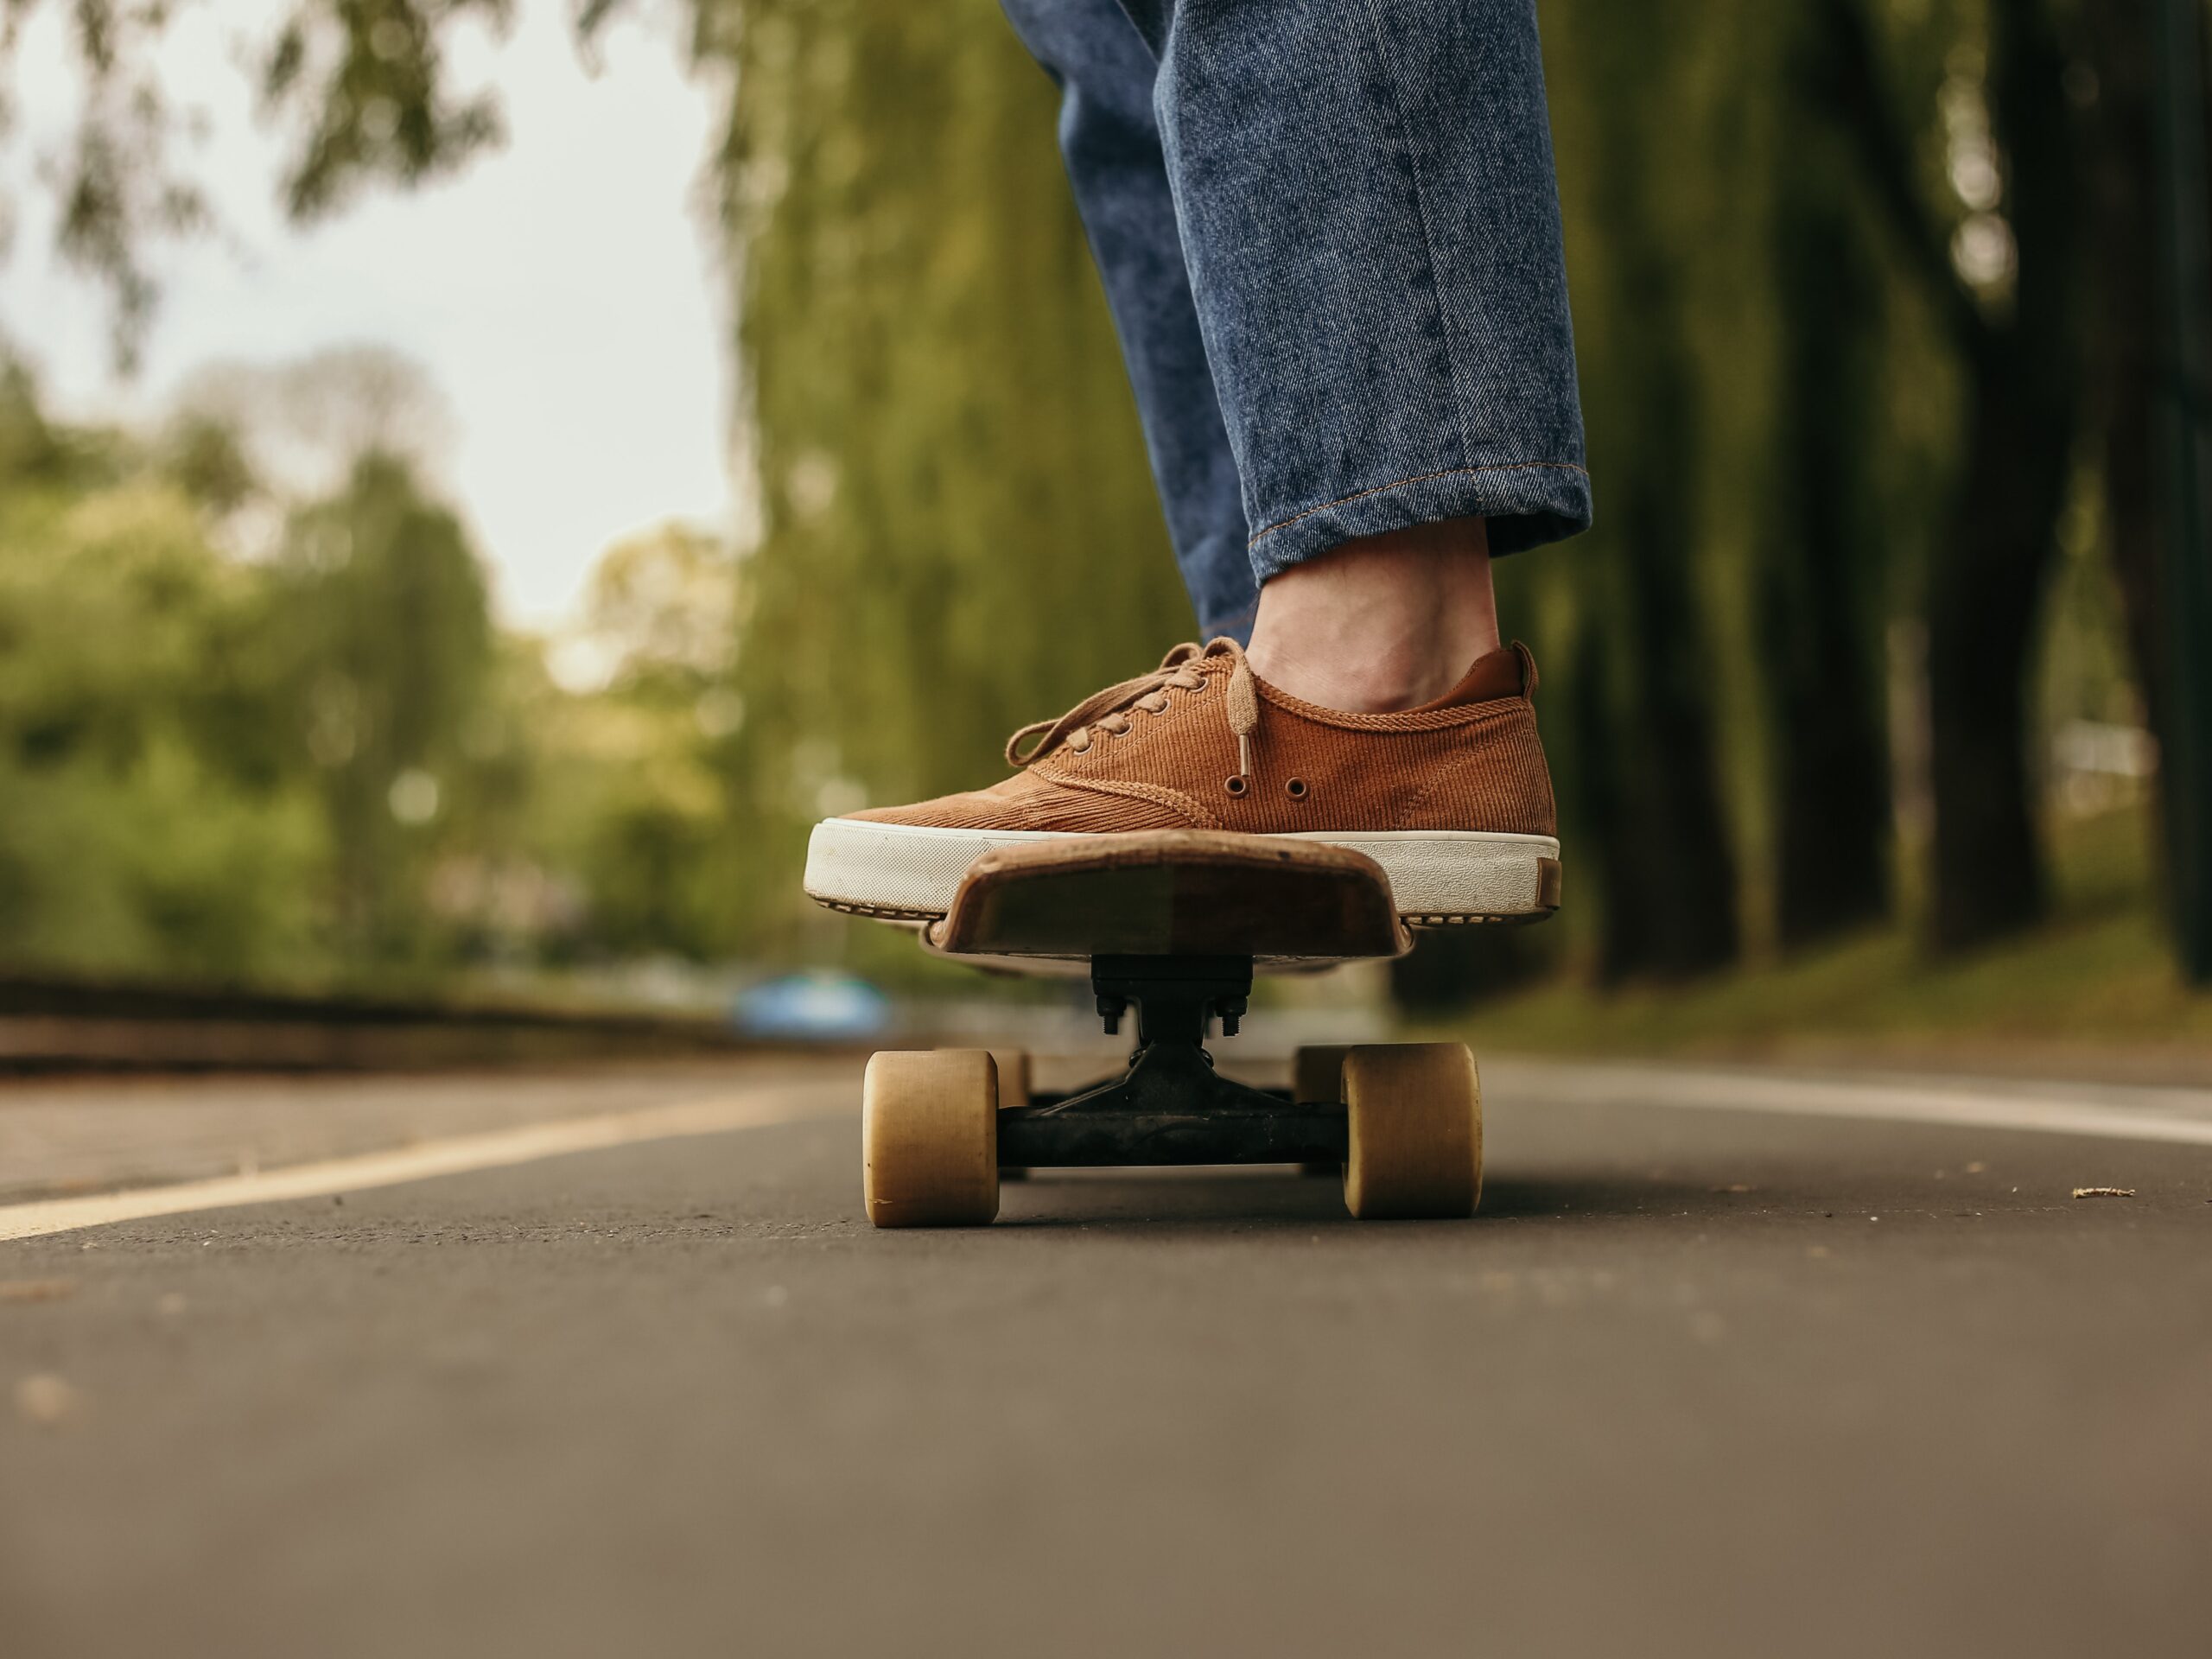 What Are Skateboarding Shoes? Explained and Recommendations